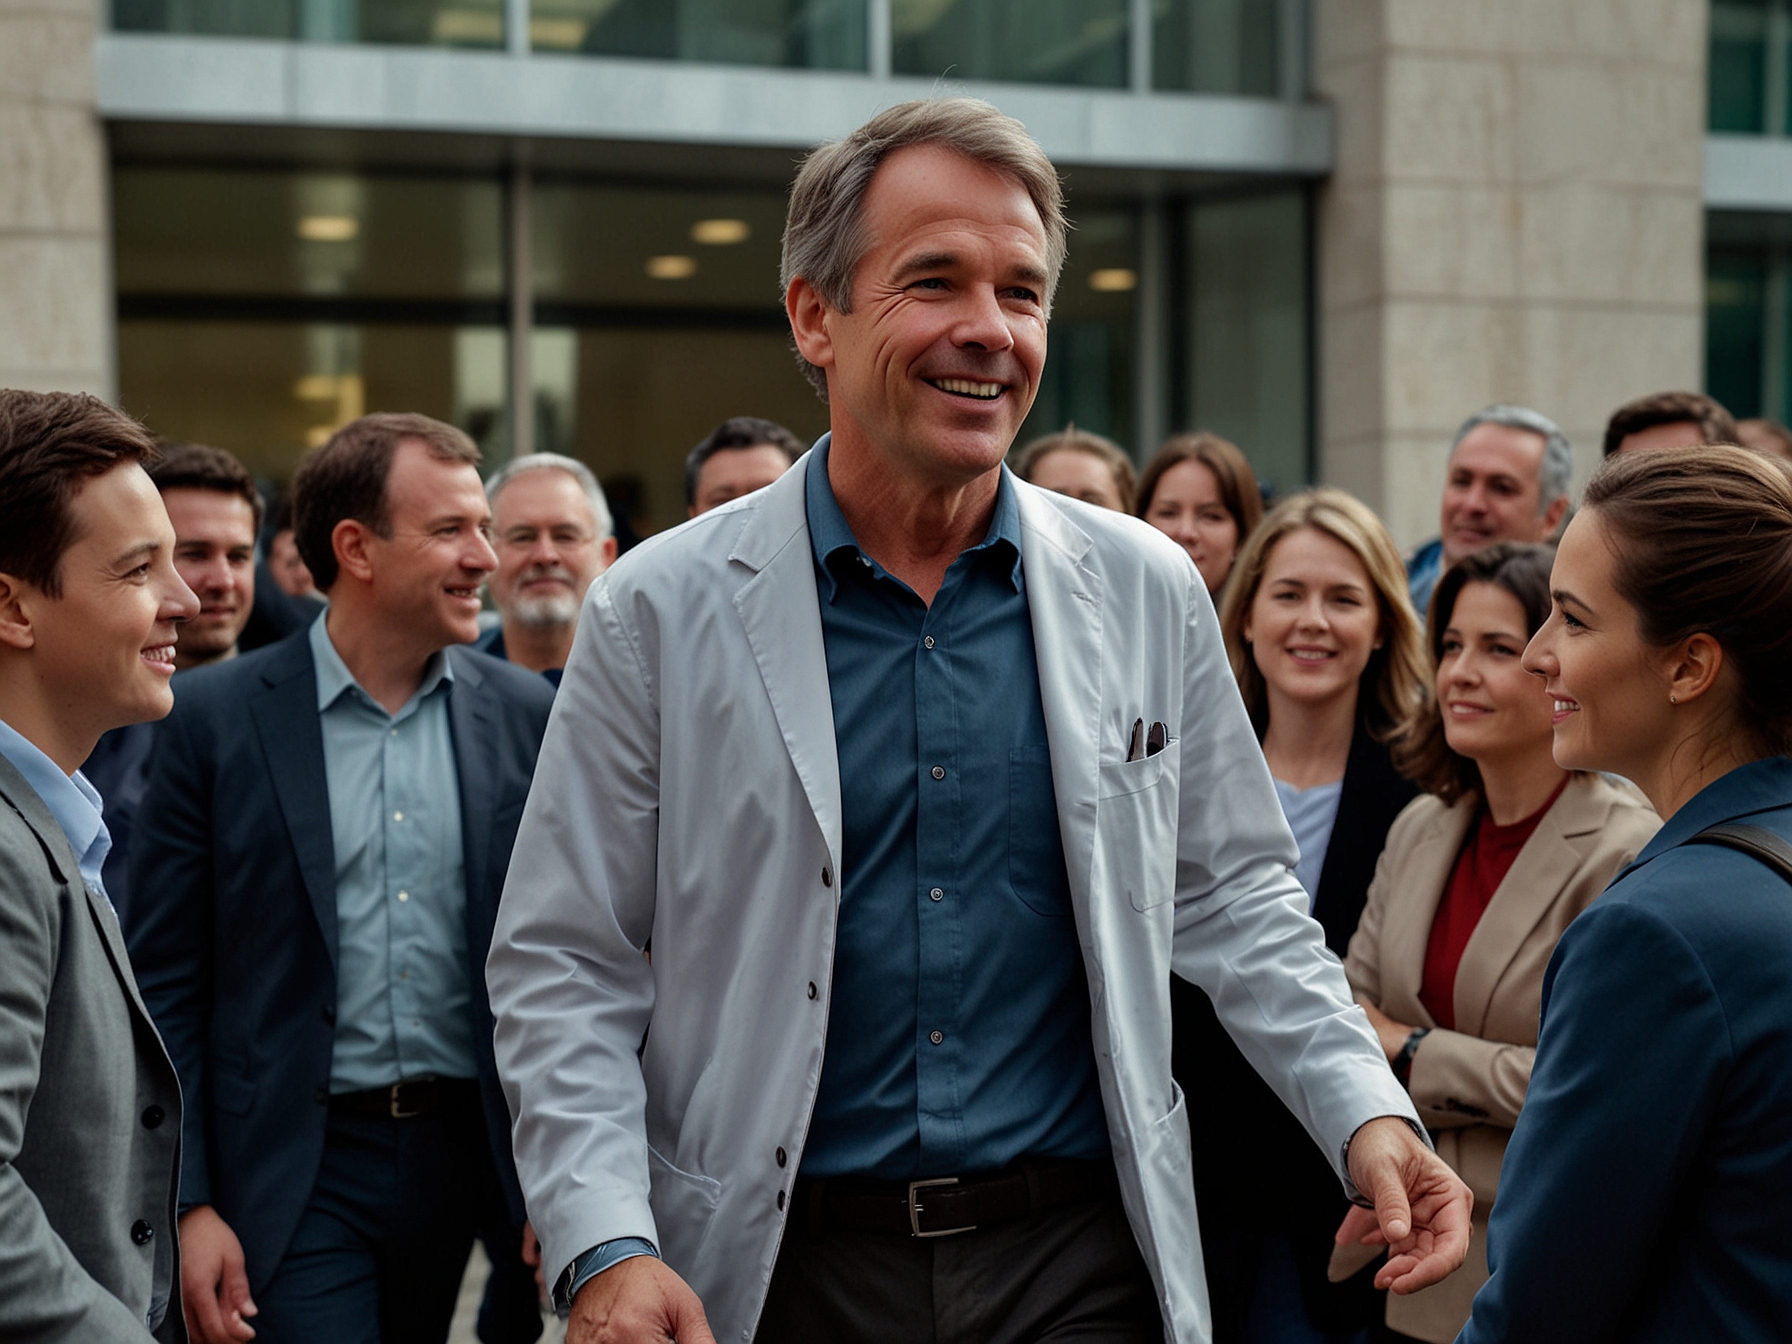 A grateful Alan Hansen leaving the hospital, surrounded by supportive fans and media. This marks a significant milestone in his recovery and highlights the community's support.